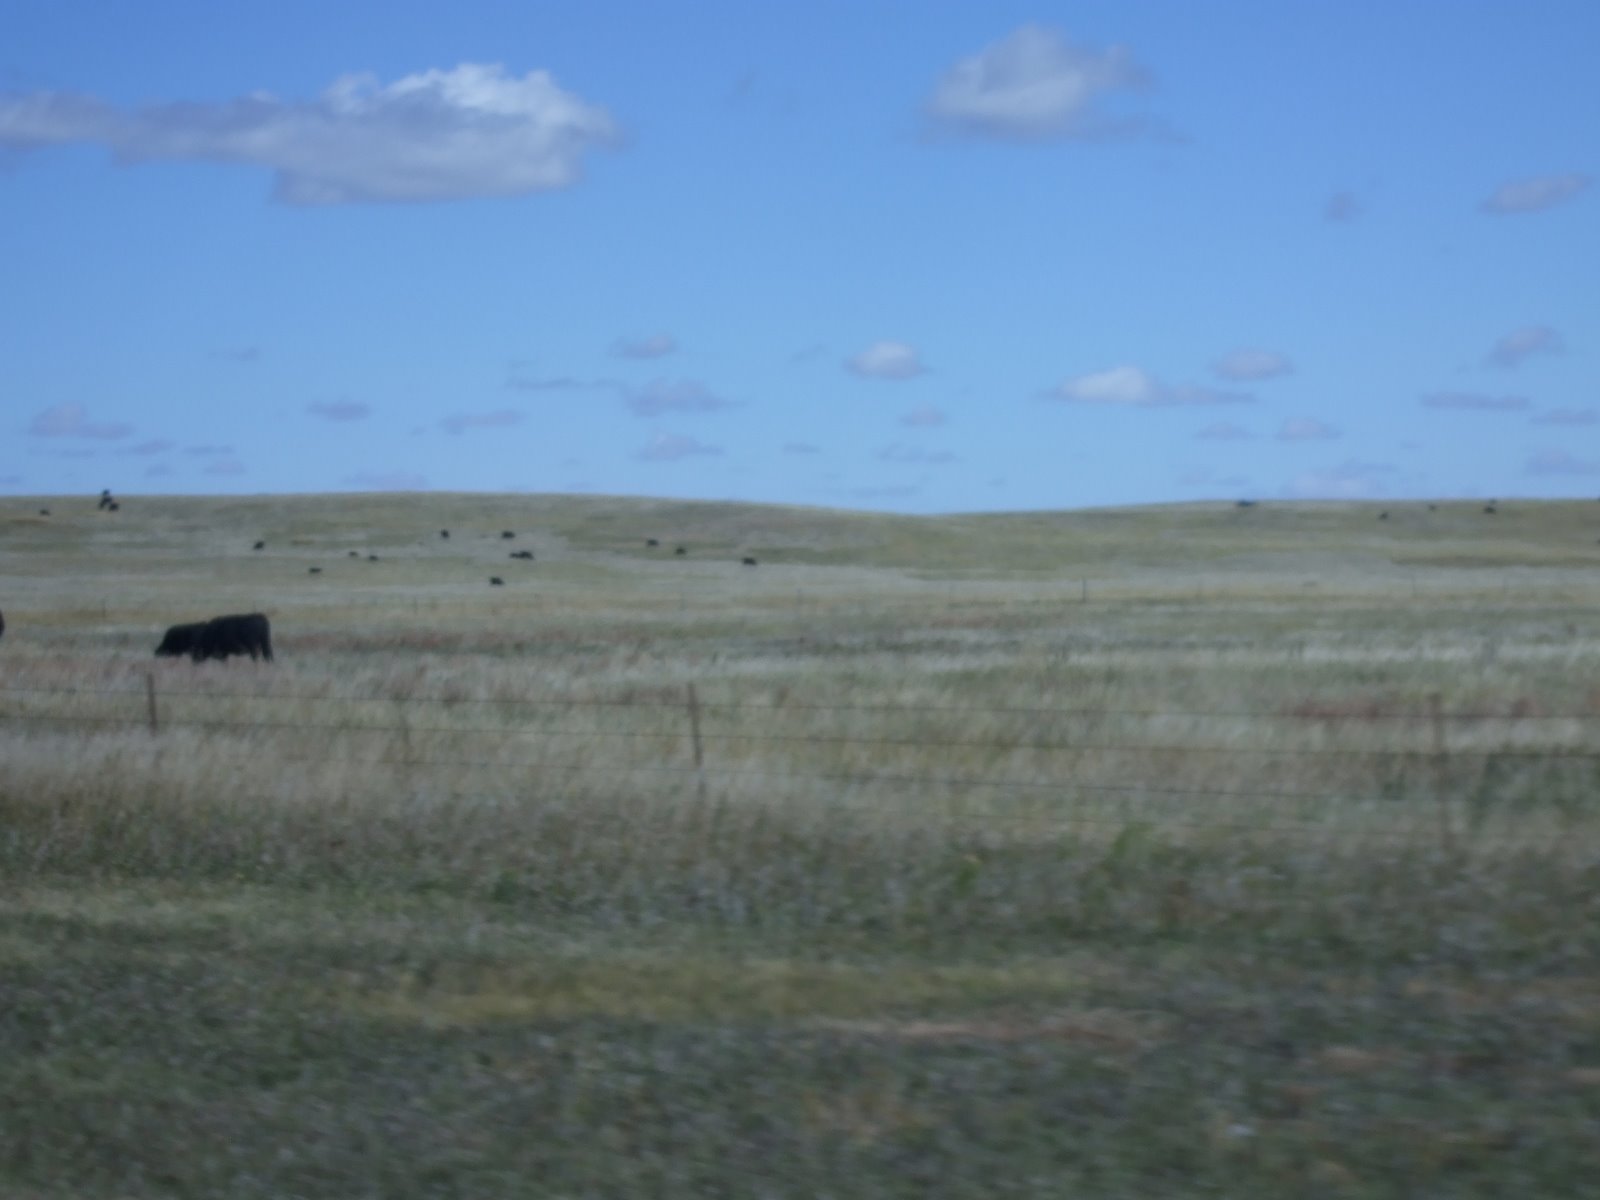 [Drive+to+SD--Cows+on+the+range+in+South+Dakota+-+2]